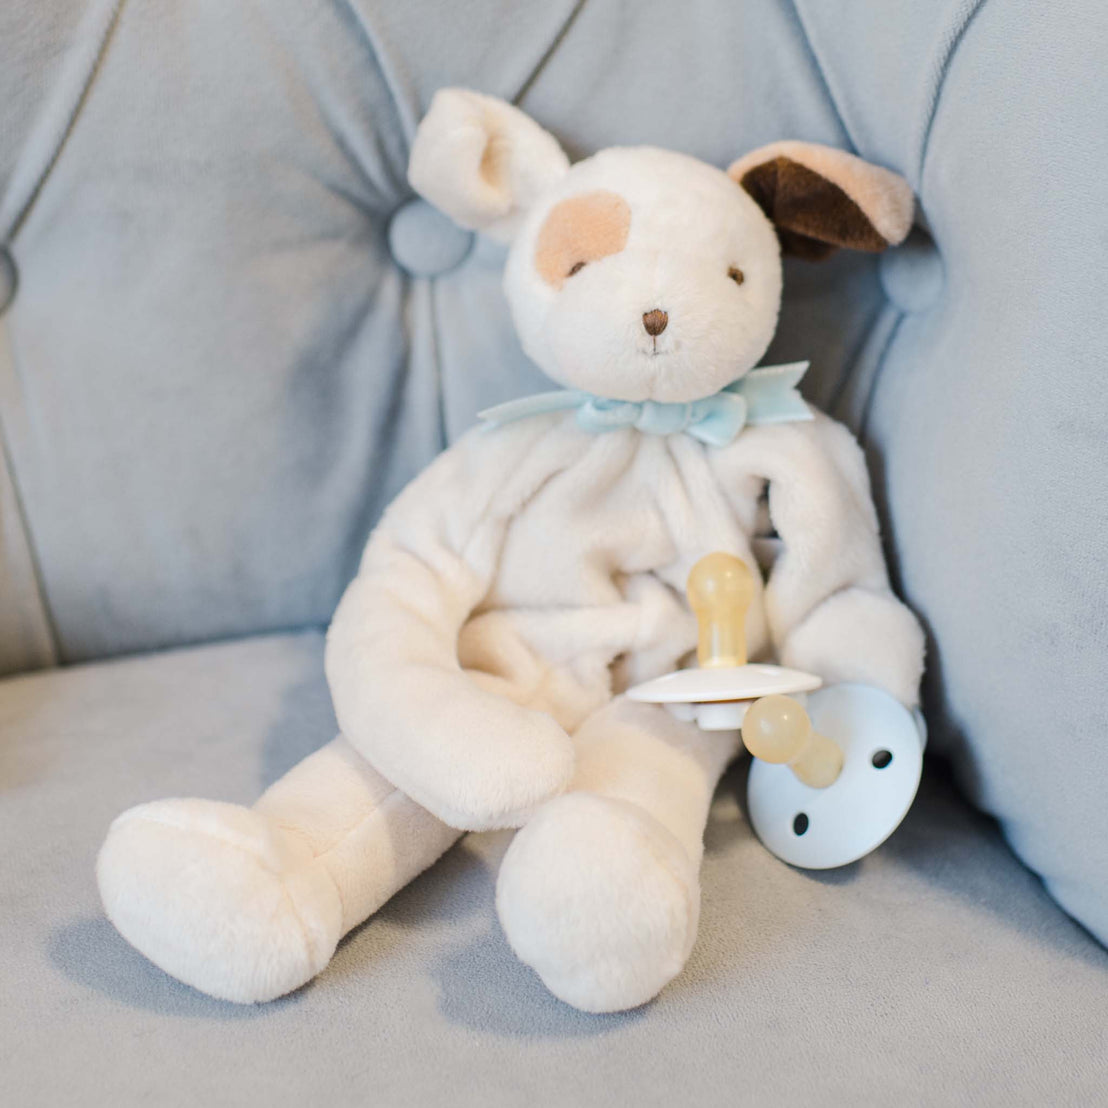 The Ezra Powder Blue Silly Puppy Buddy stuffed animal sitting on a couch. This stuffed animal serves as a pacifier holder